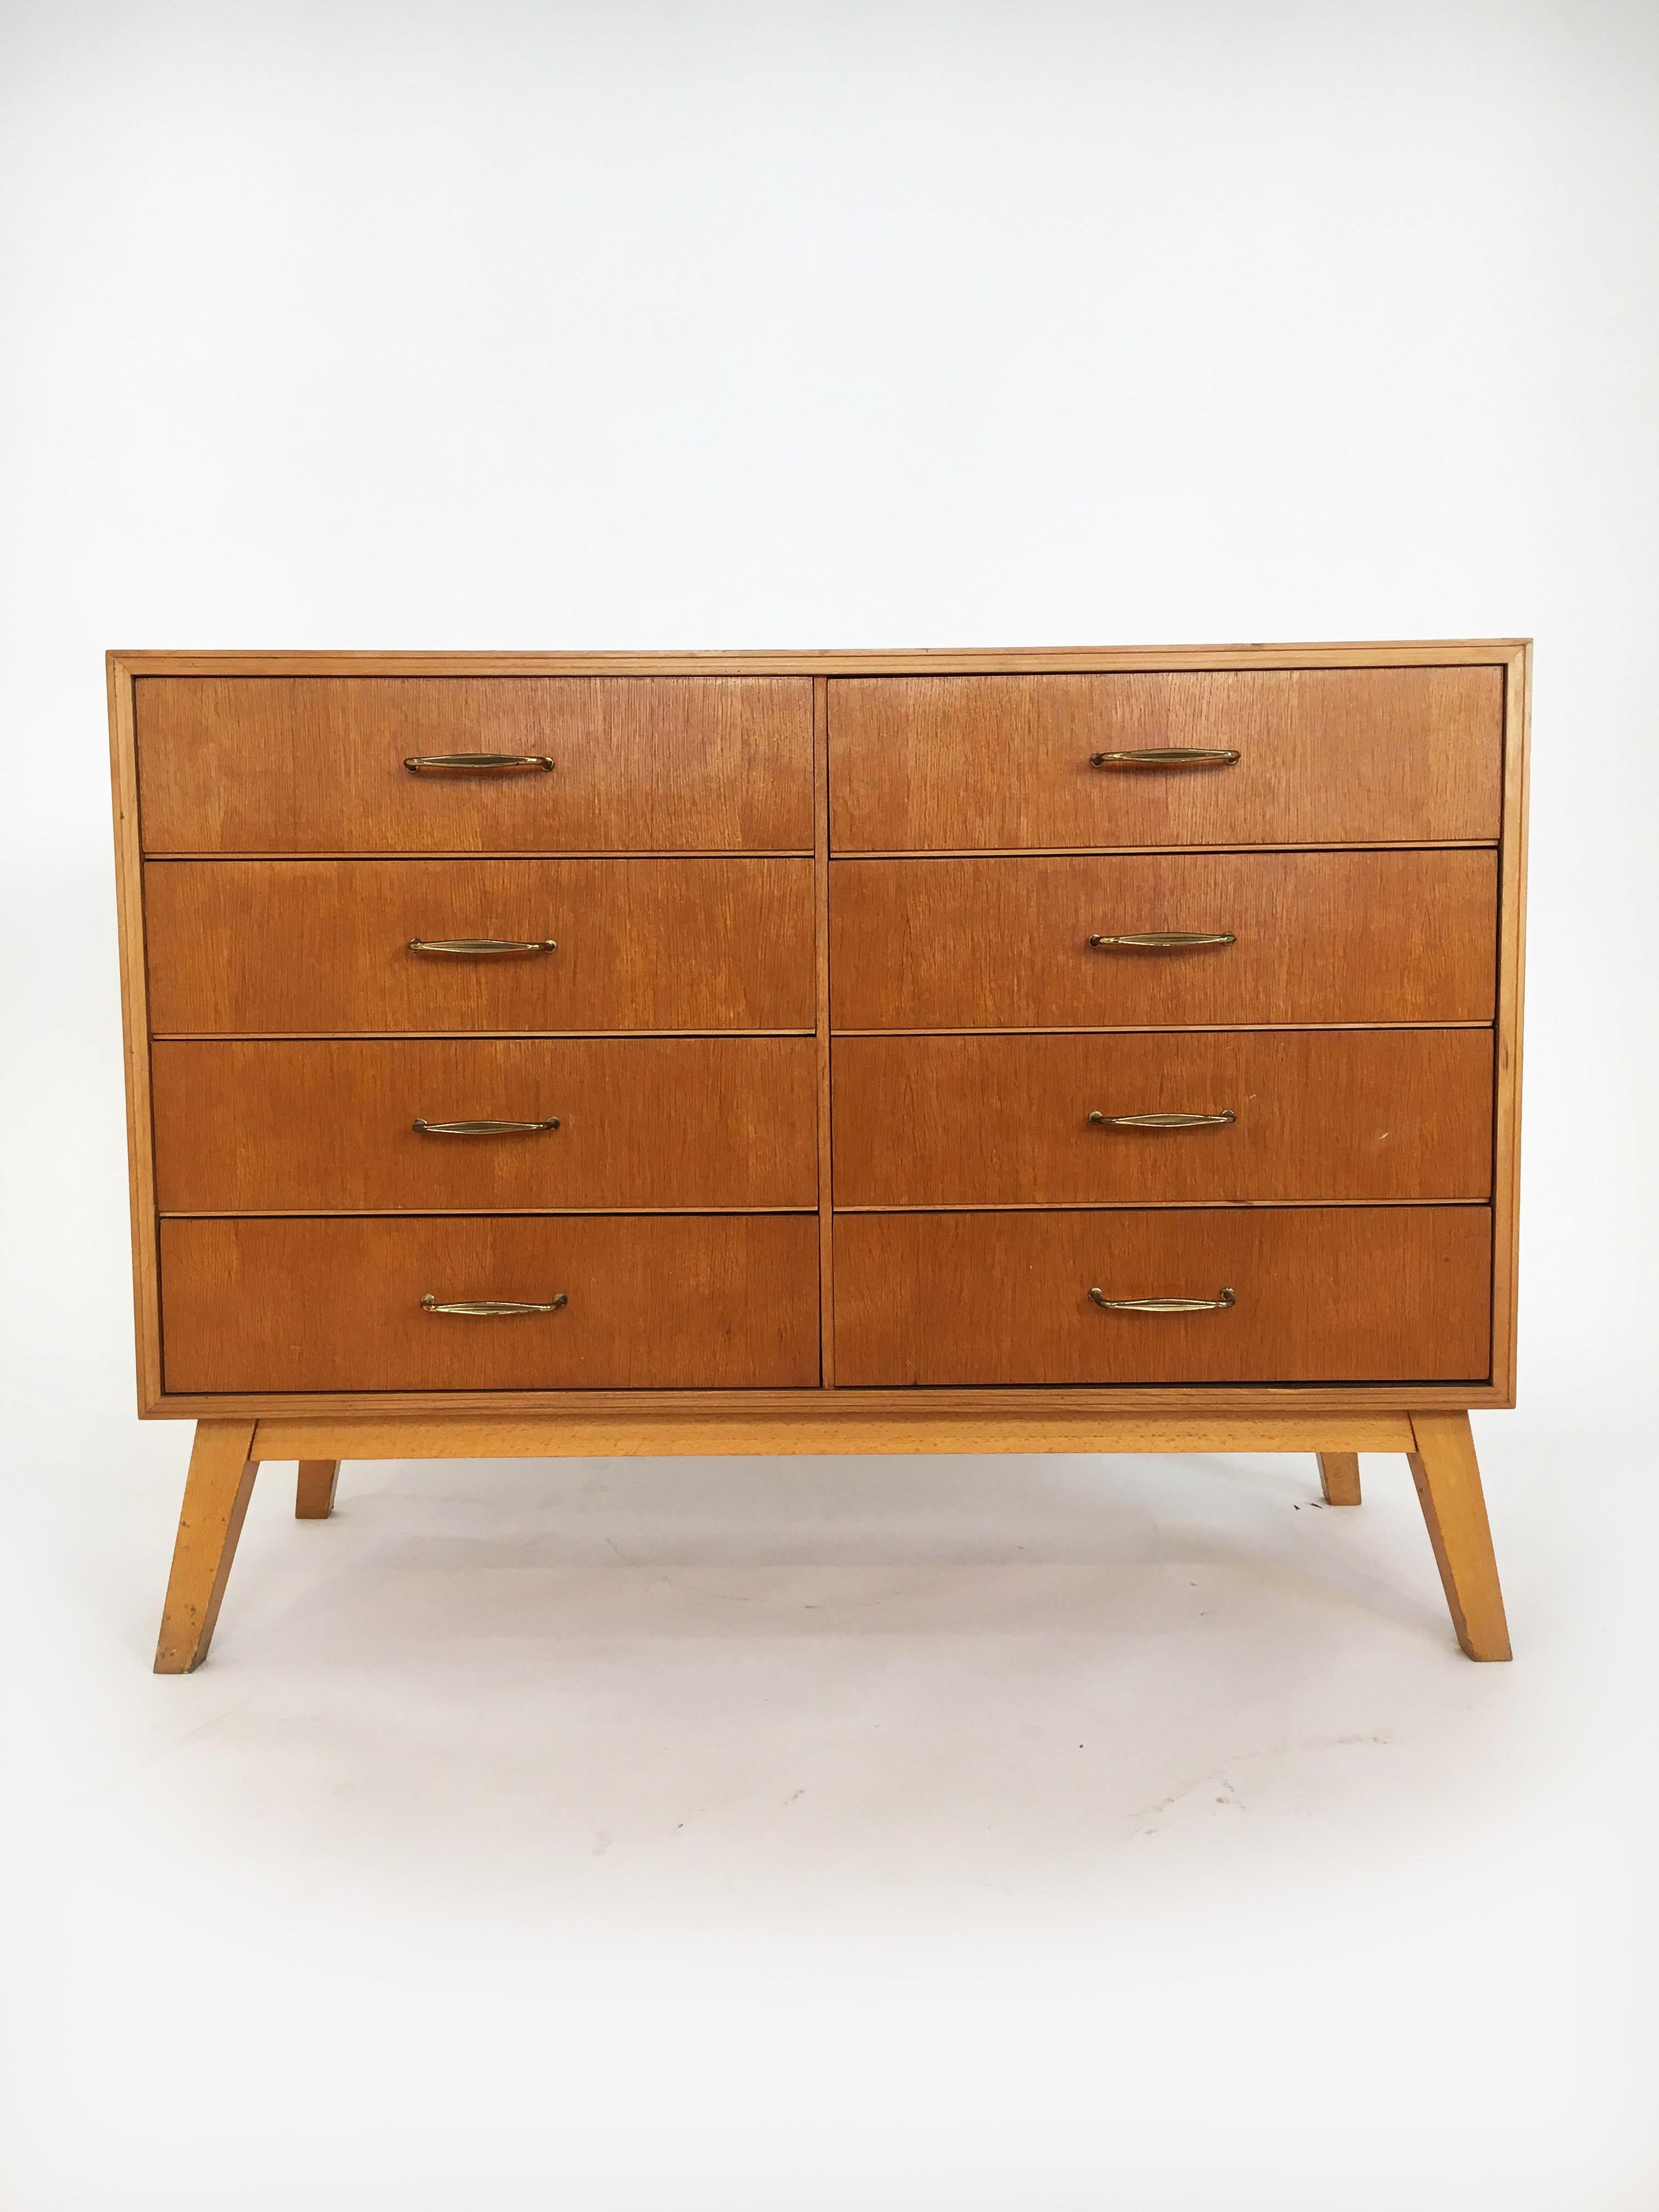 SW Möbel sideboard Vienna, SW Möbel sideboard, chest of drawers, bookcase collection, Vienna, 1950s. SW Möbel (Soziale Wohnkultur) was a furniture brand of the 1950s, created to provide modern functional furniture at affordable prices for small